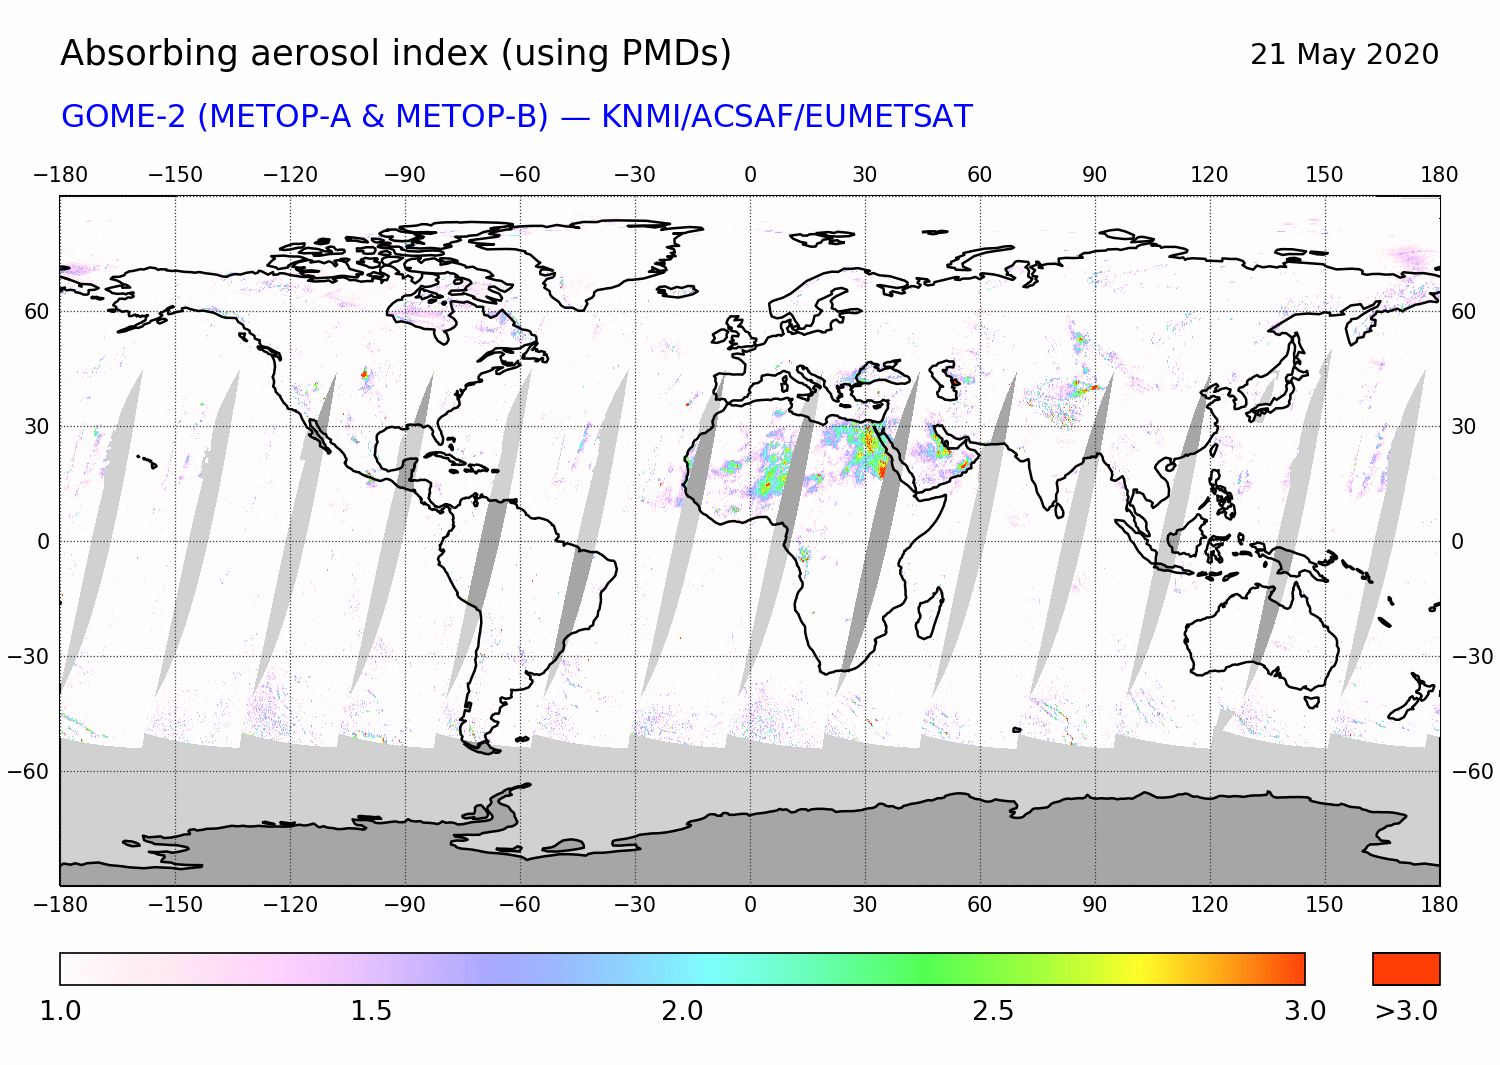 GOME-2 - Absorbing aerosol index of 21 May 2020